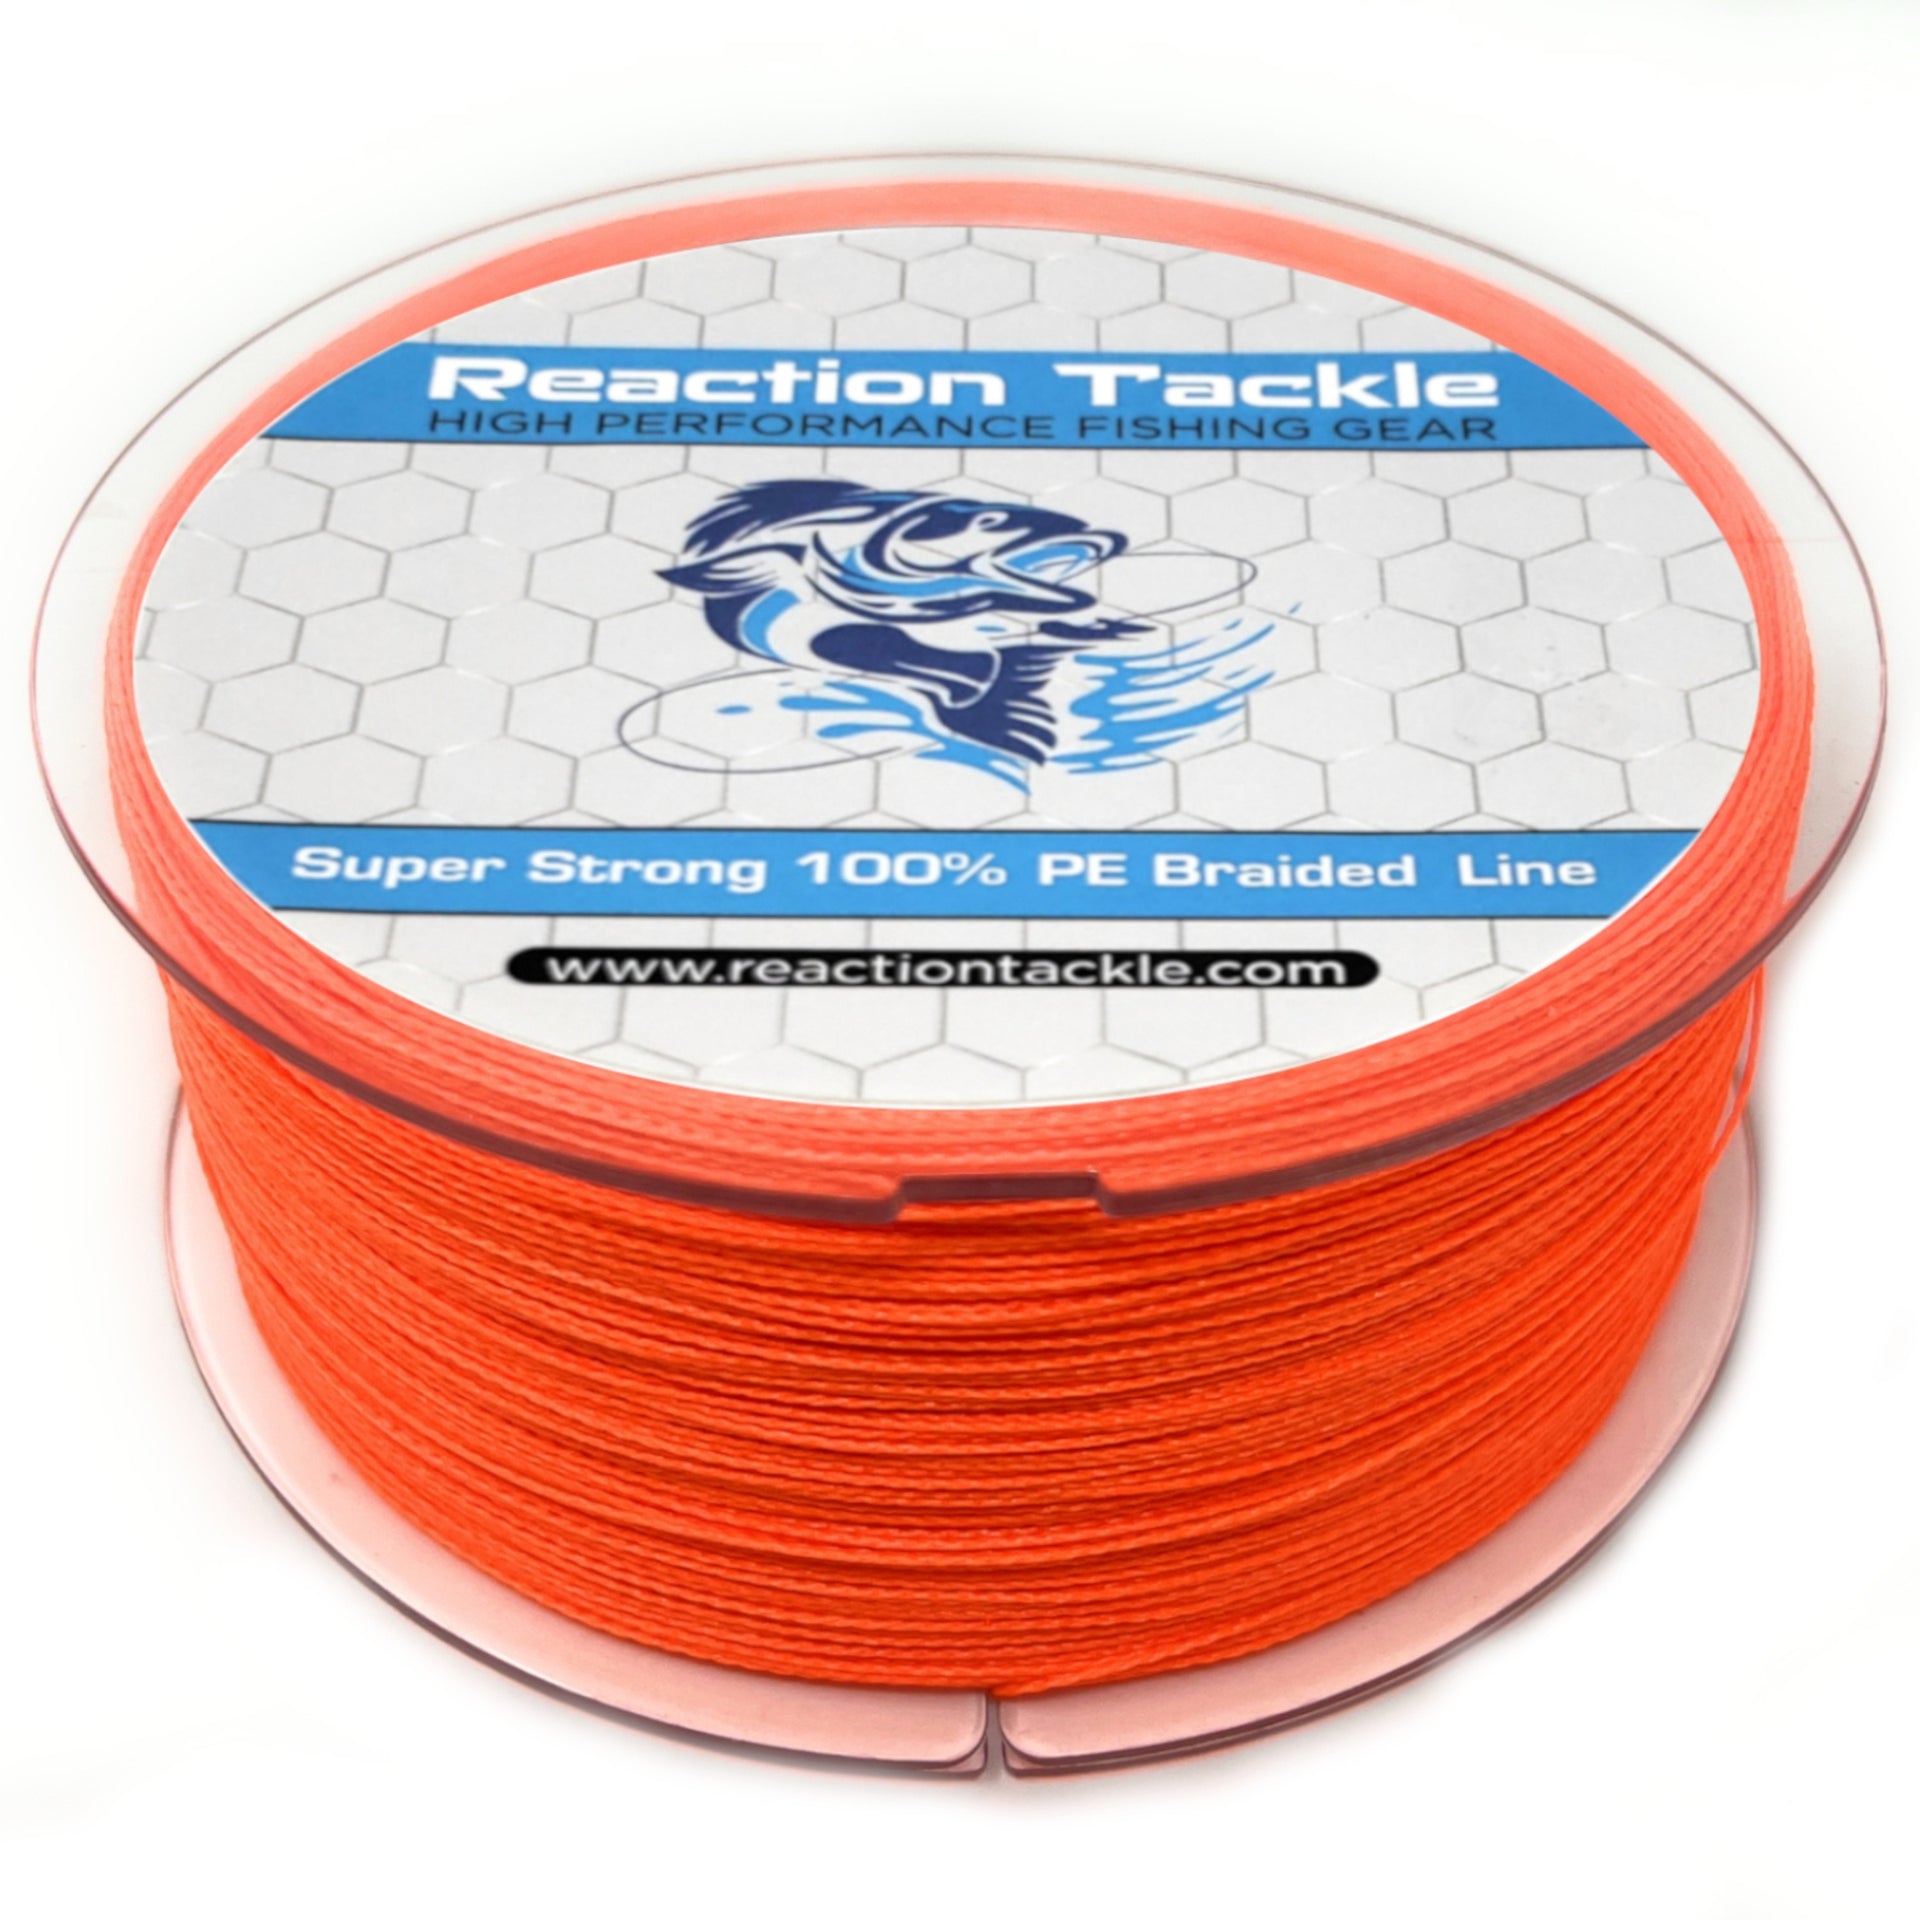 Orange 8 lb Line Weight Fishing Fishing Lines & Leaders for sale